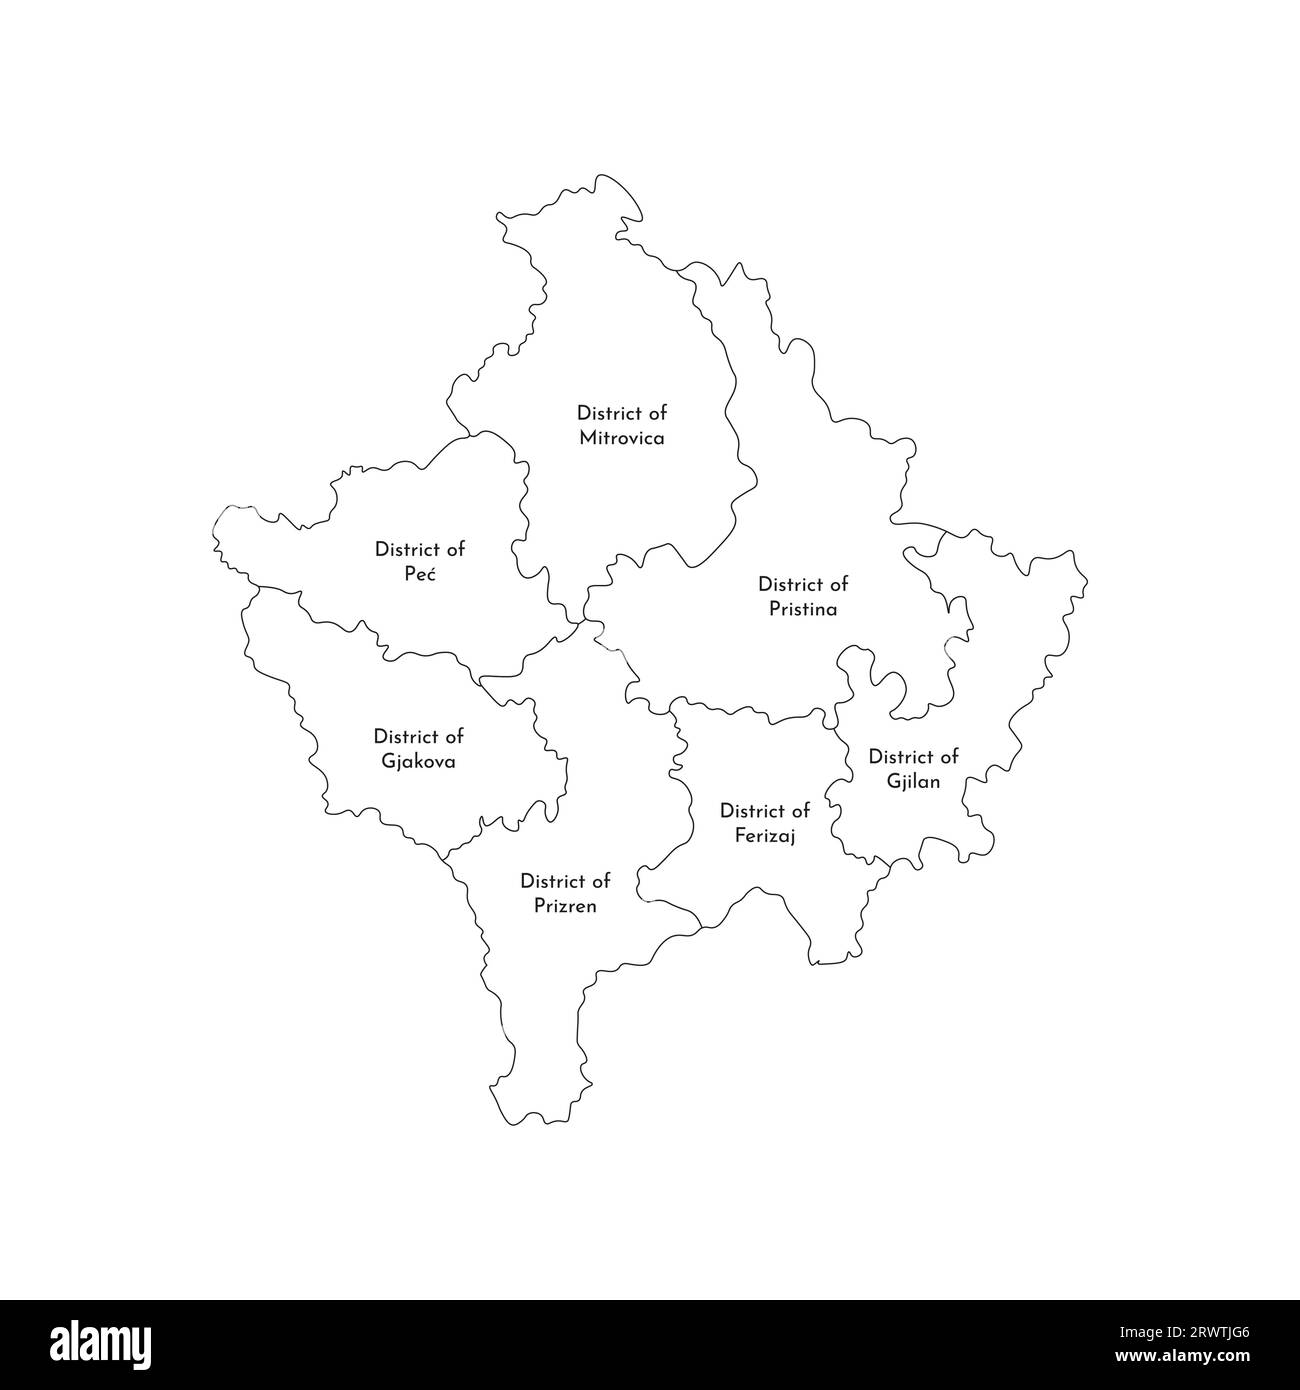 Vector isolated illustration of simplified administrative map of Kosovo. Borders and names of the districts. Black line silhouettes. Stock Vector